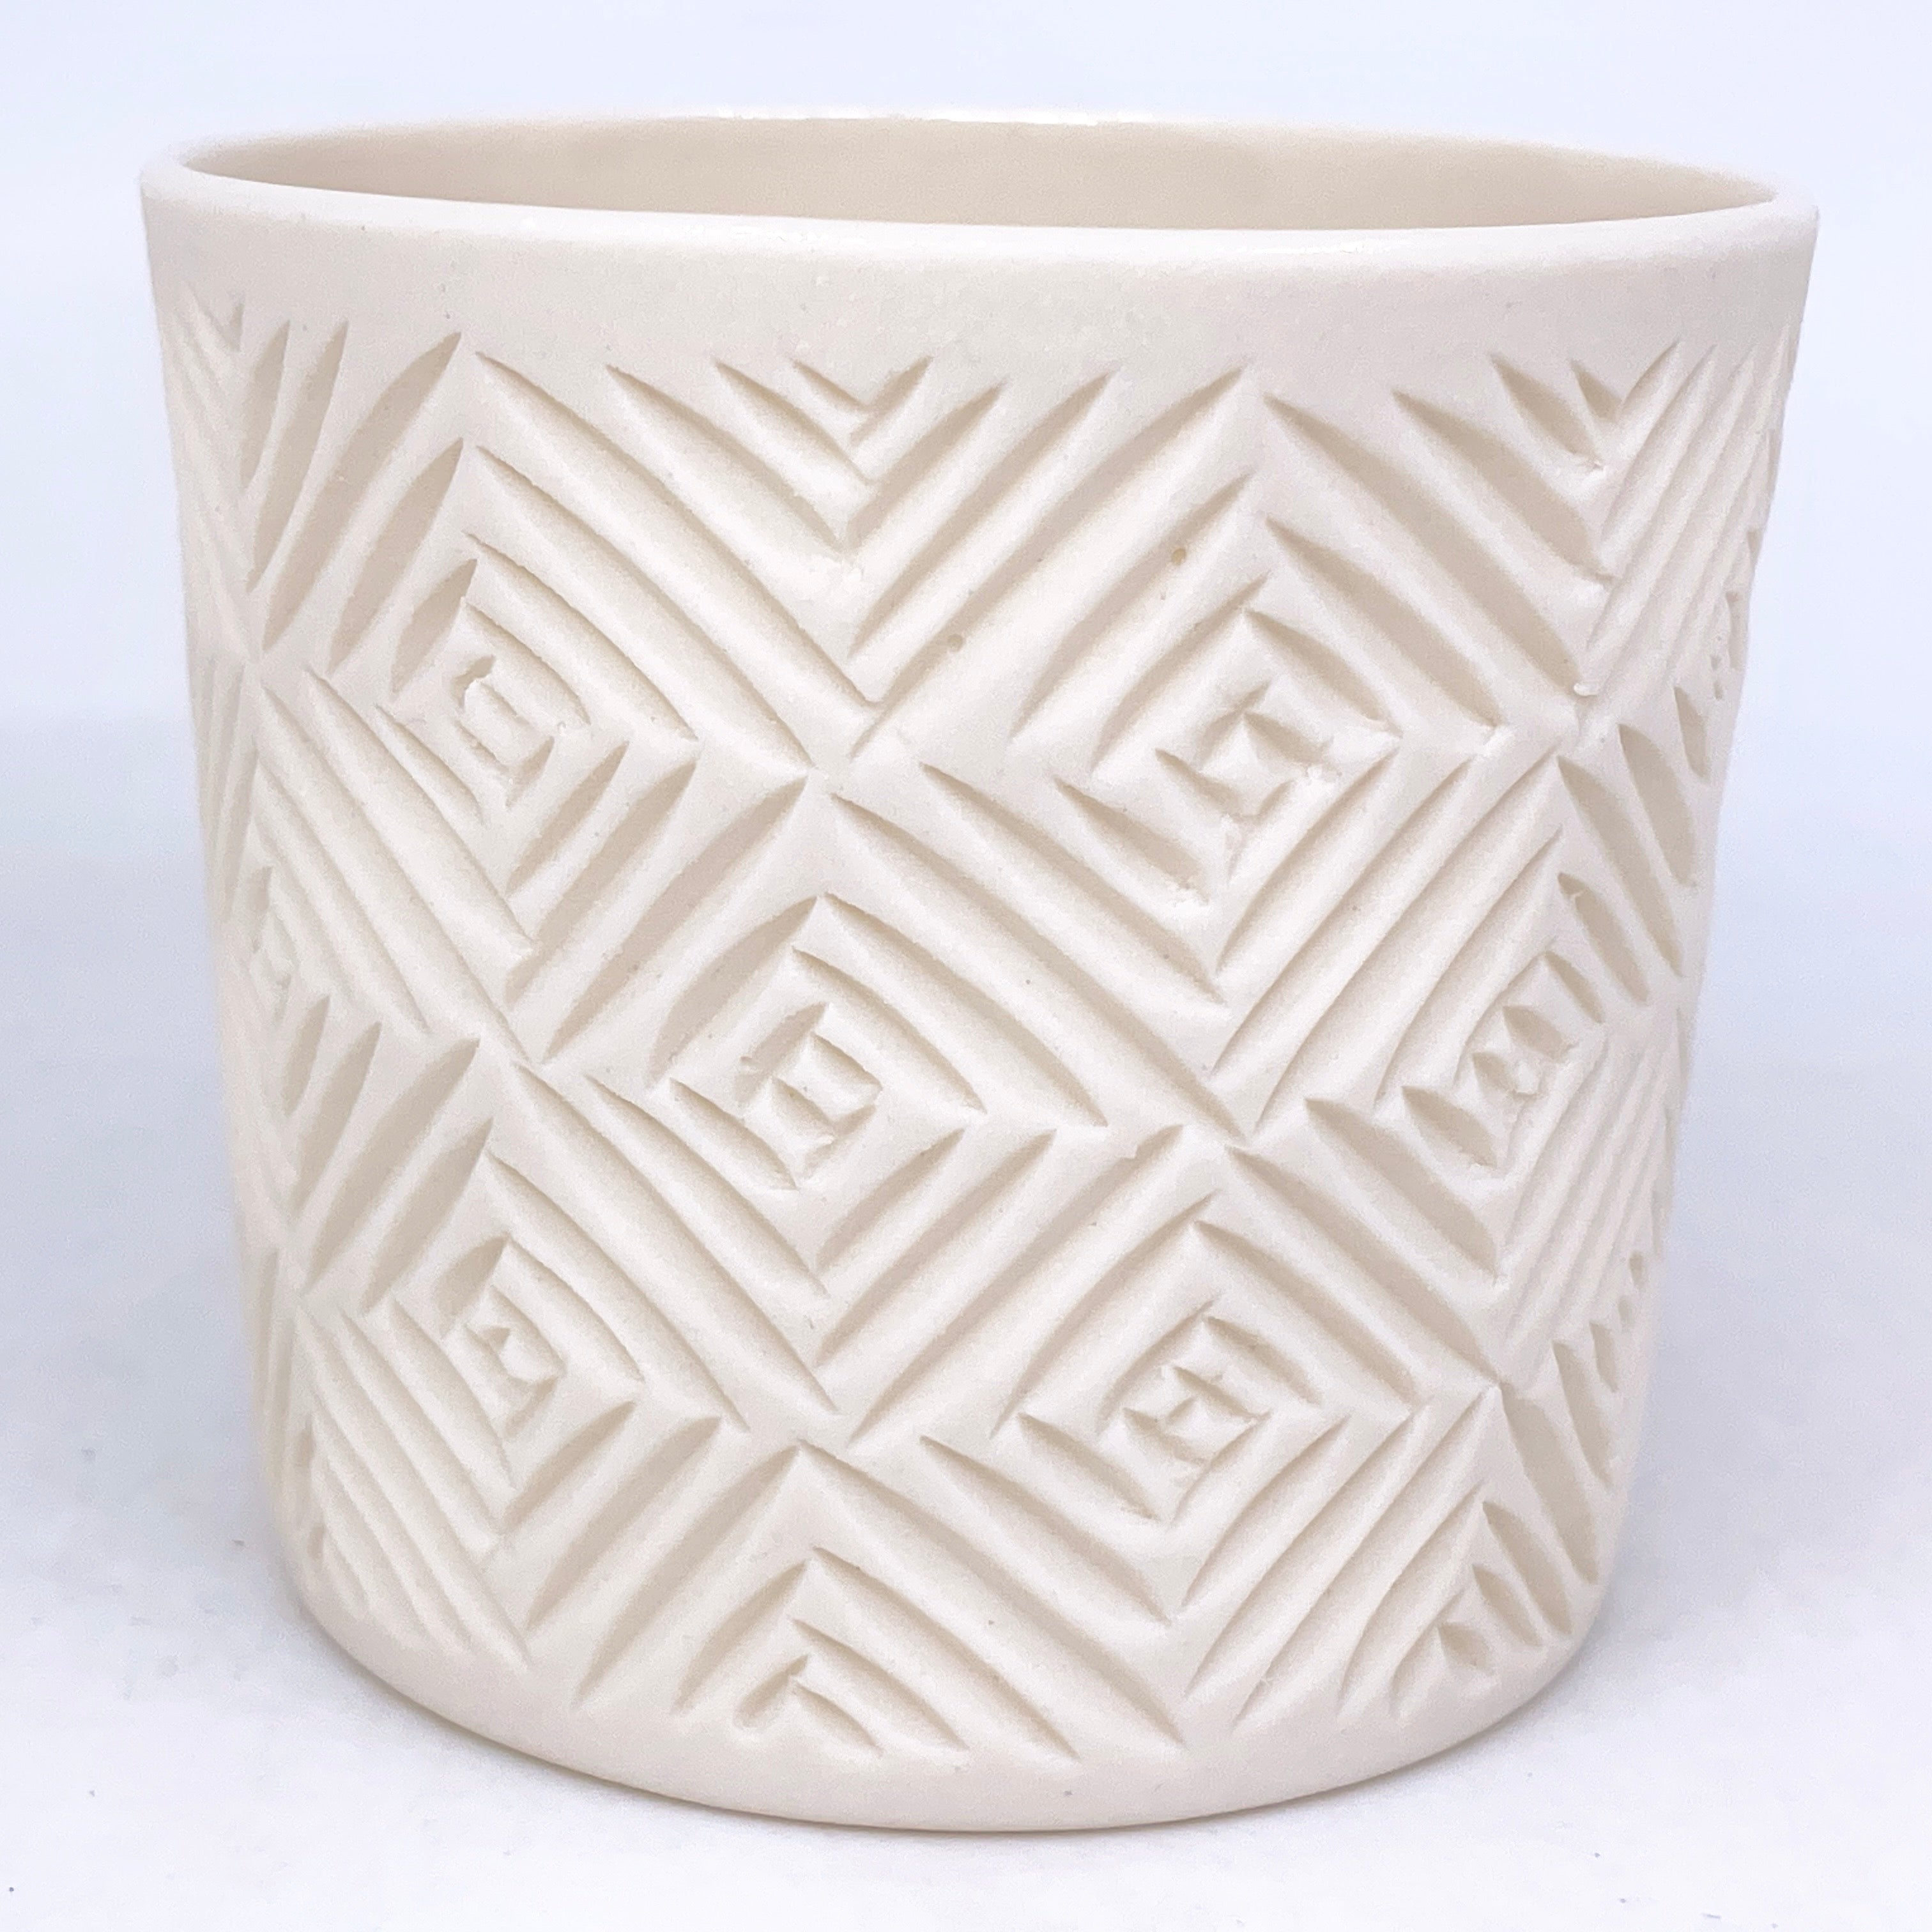 *Now preorder* Lattice Carved Luminary (Ship by Dec 15)